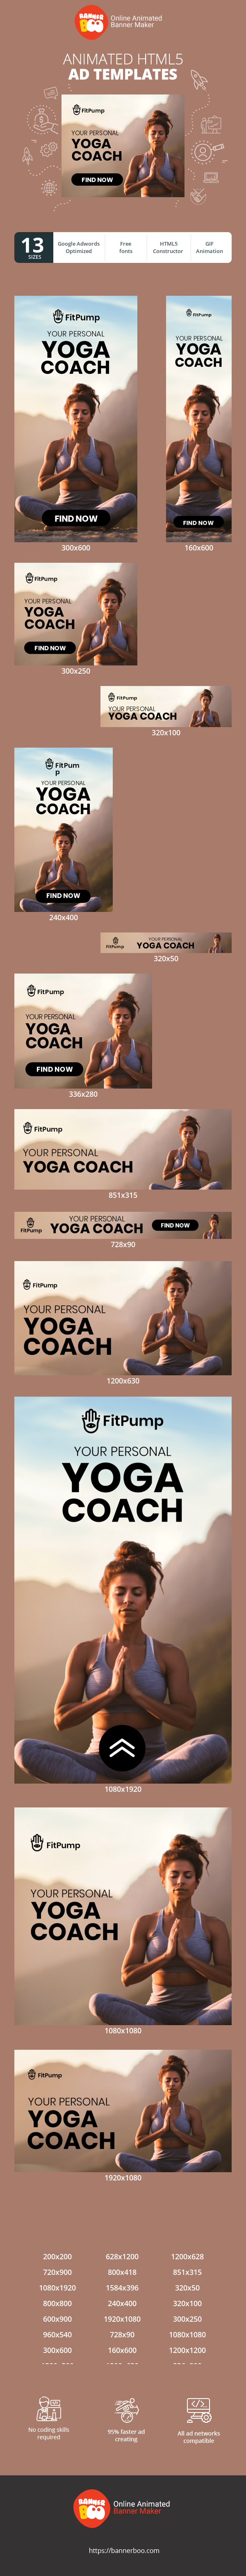 Banner ad template — Your Personal — Yoga Coach